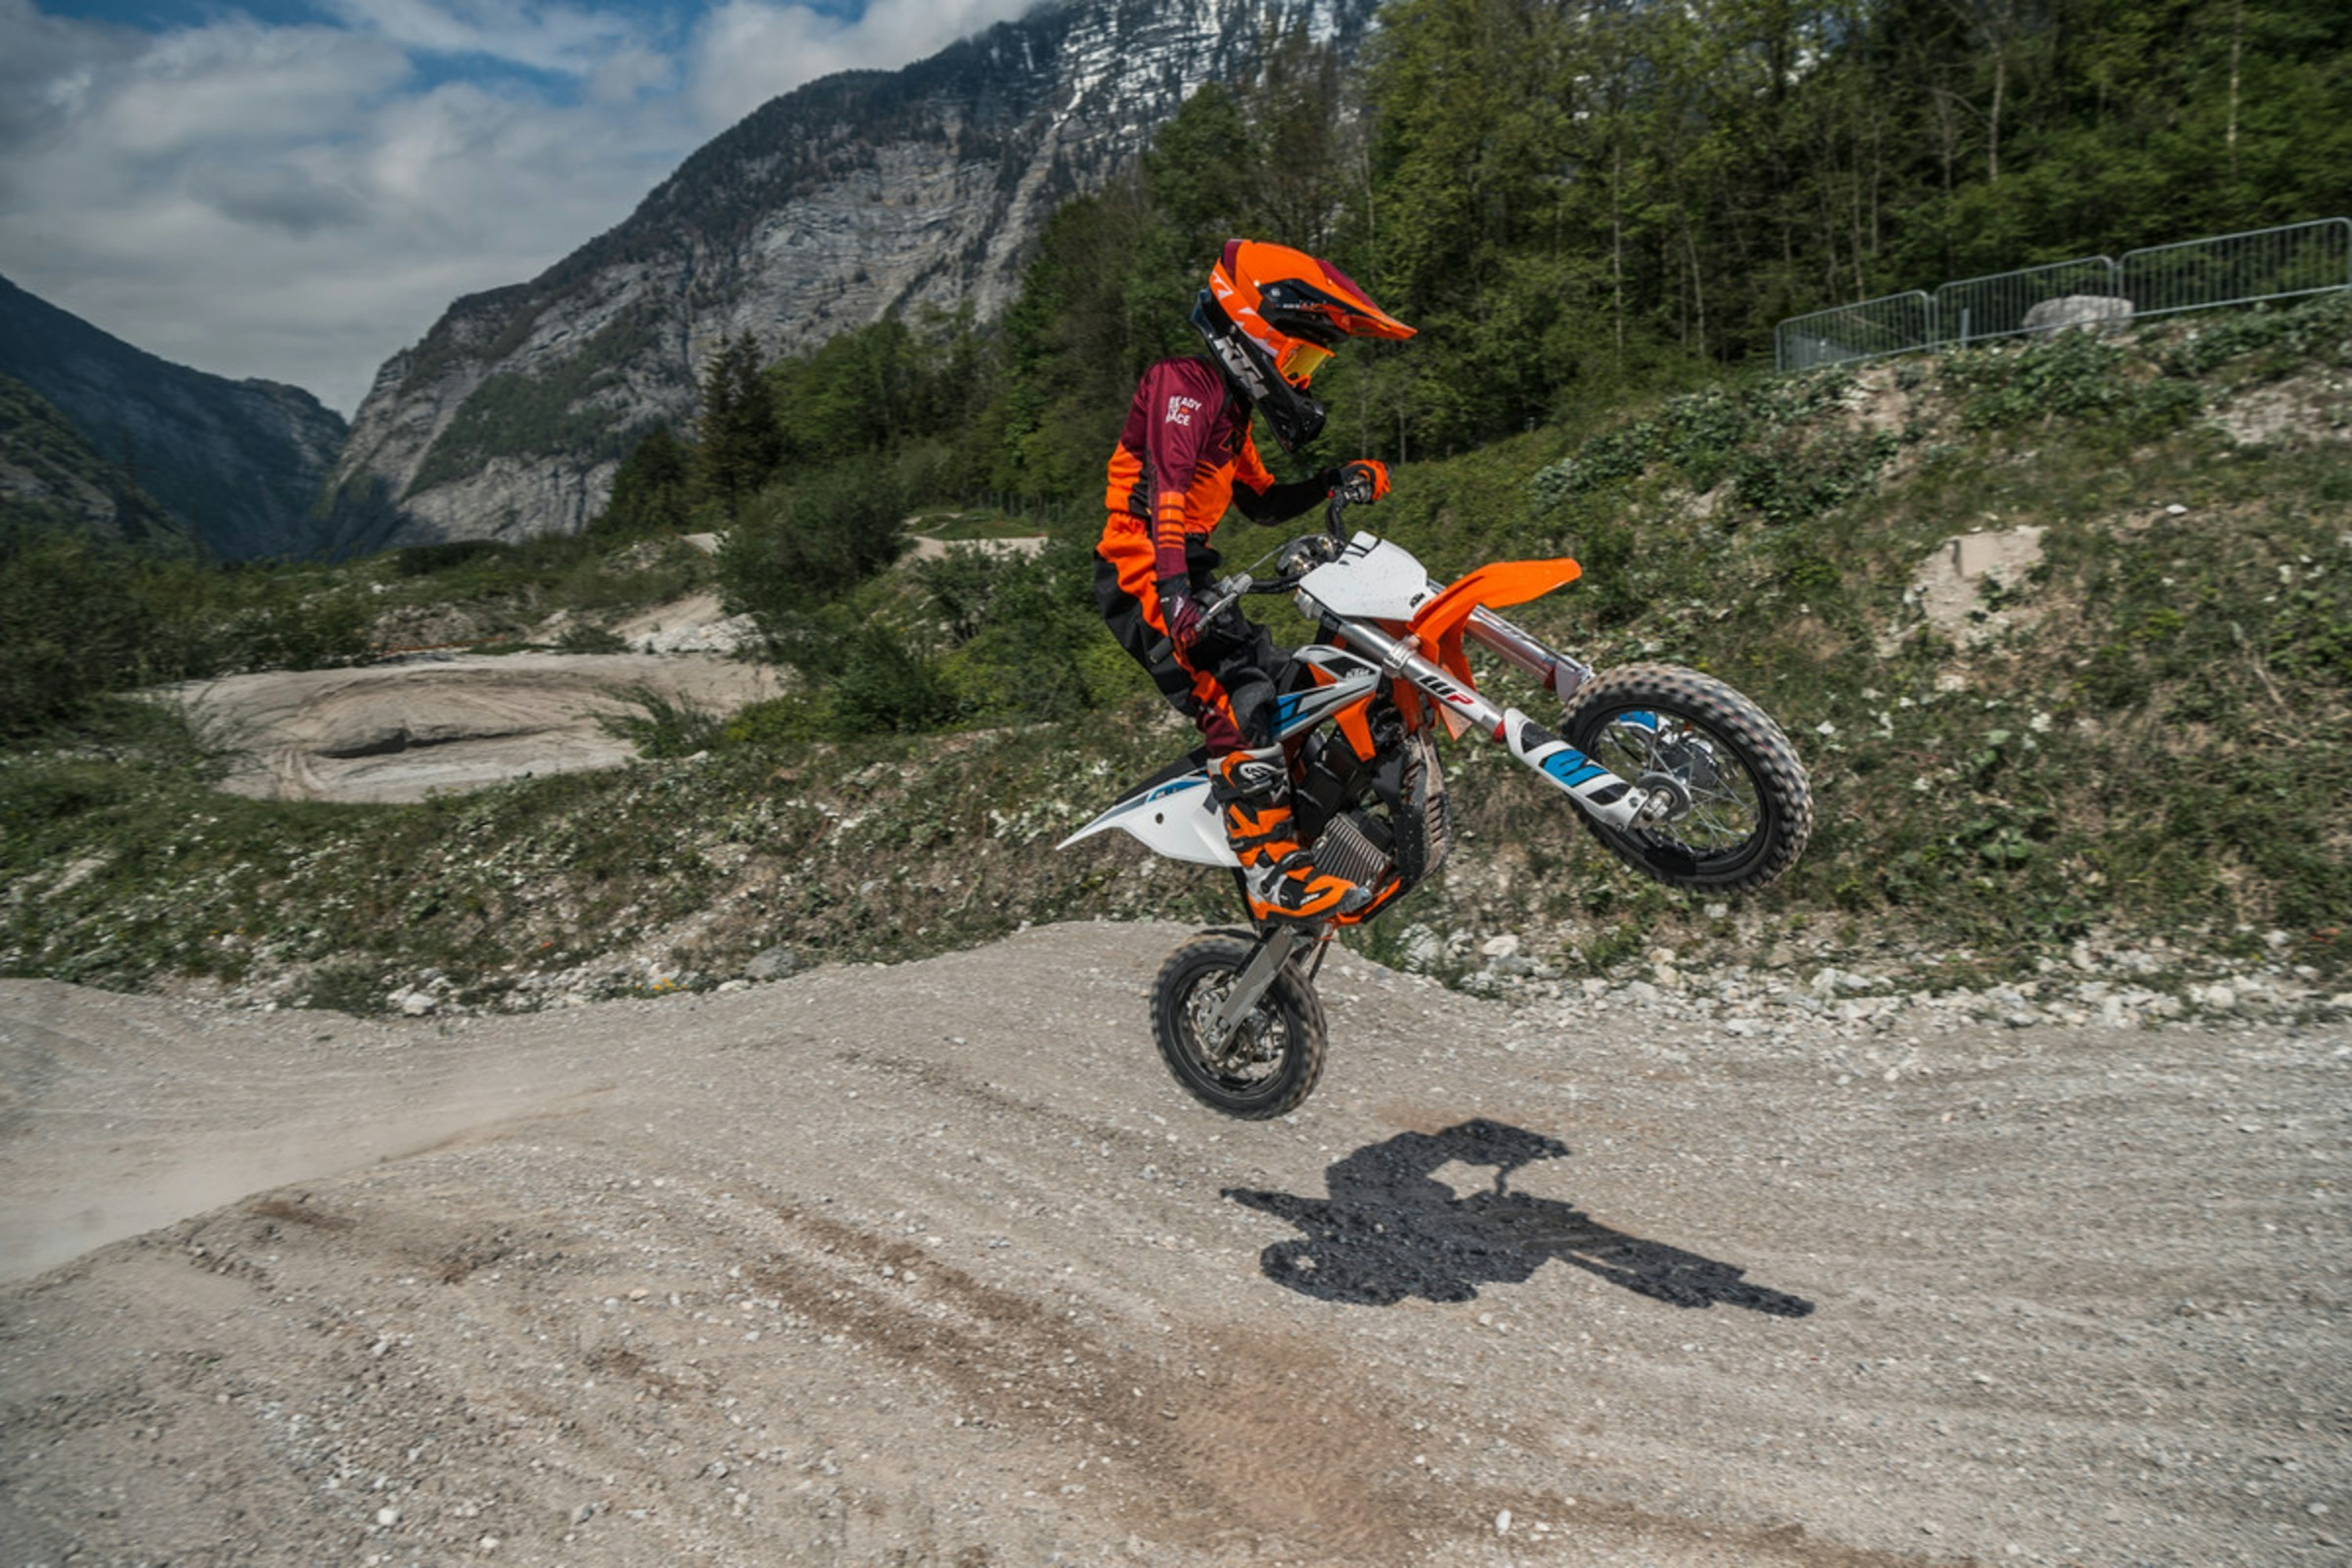 KTM Introduces All-Electric SX-E 2 Minibike - Racer X